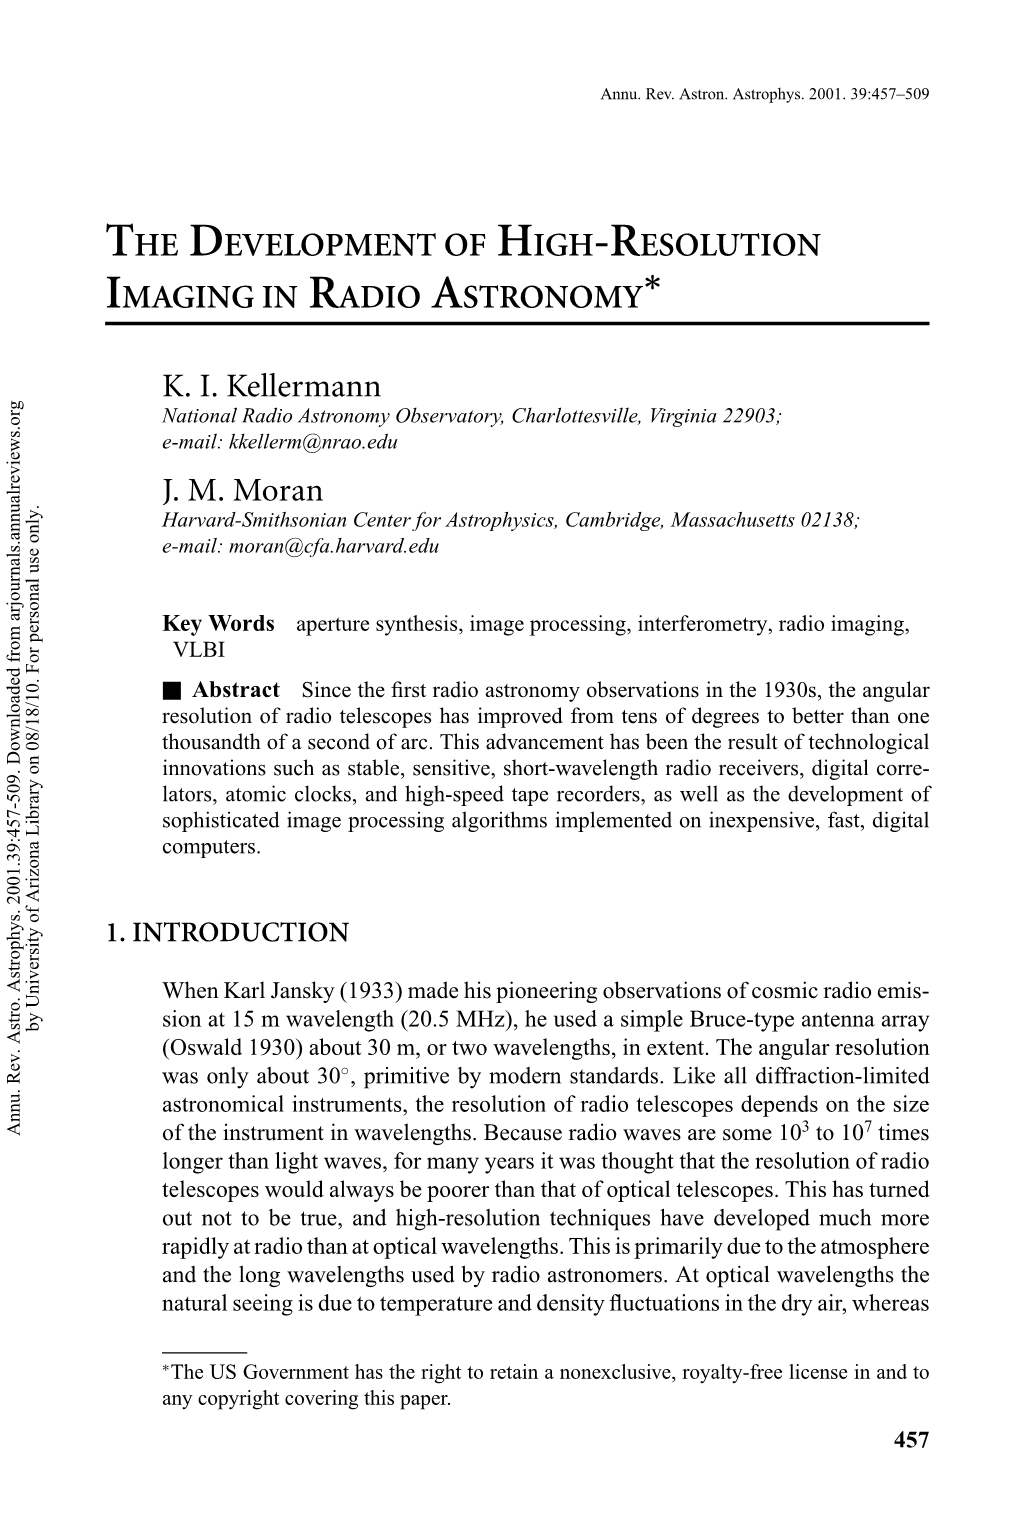 The Development of High-Resolution Imaging in Radio Astronomy